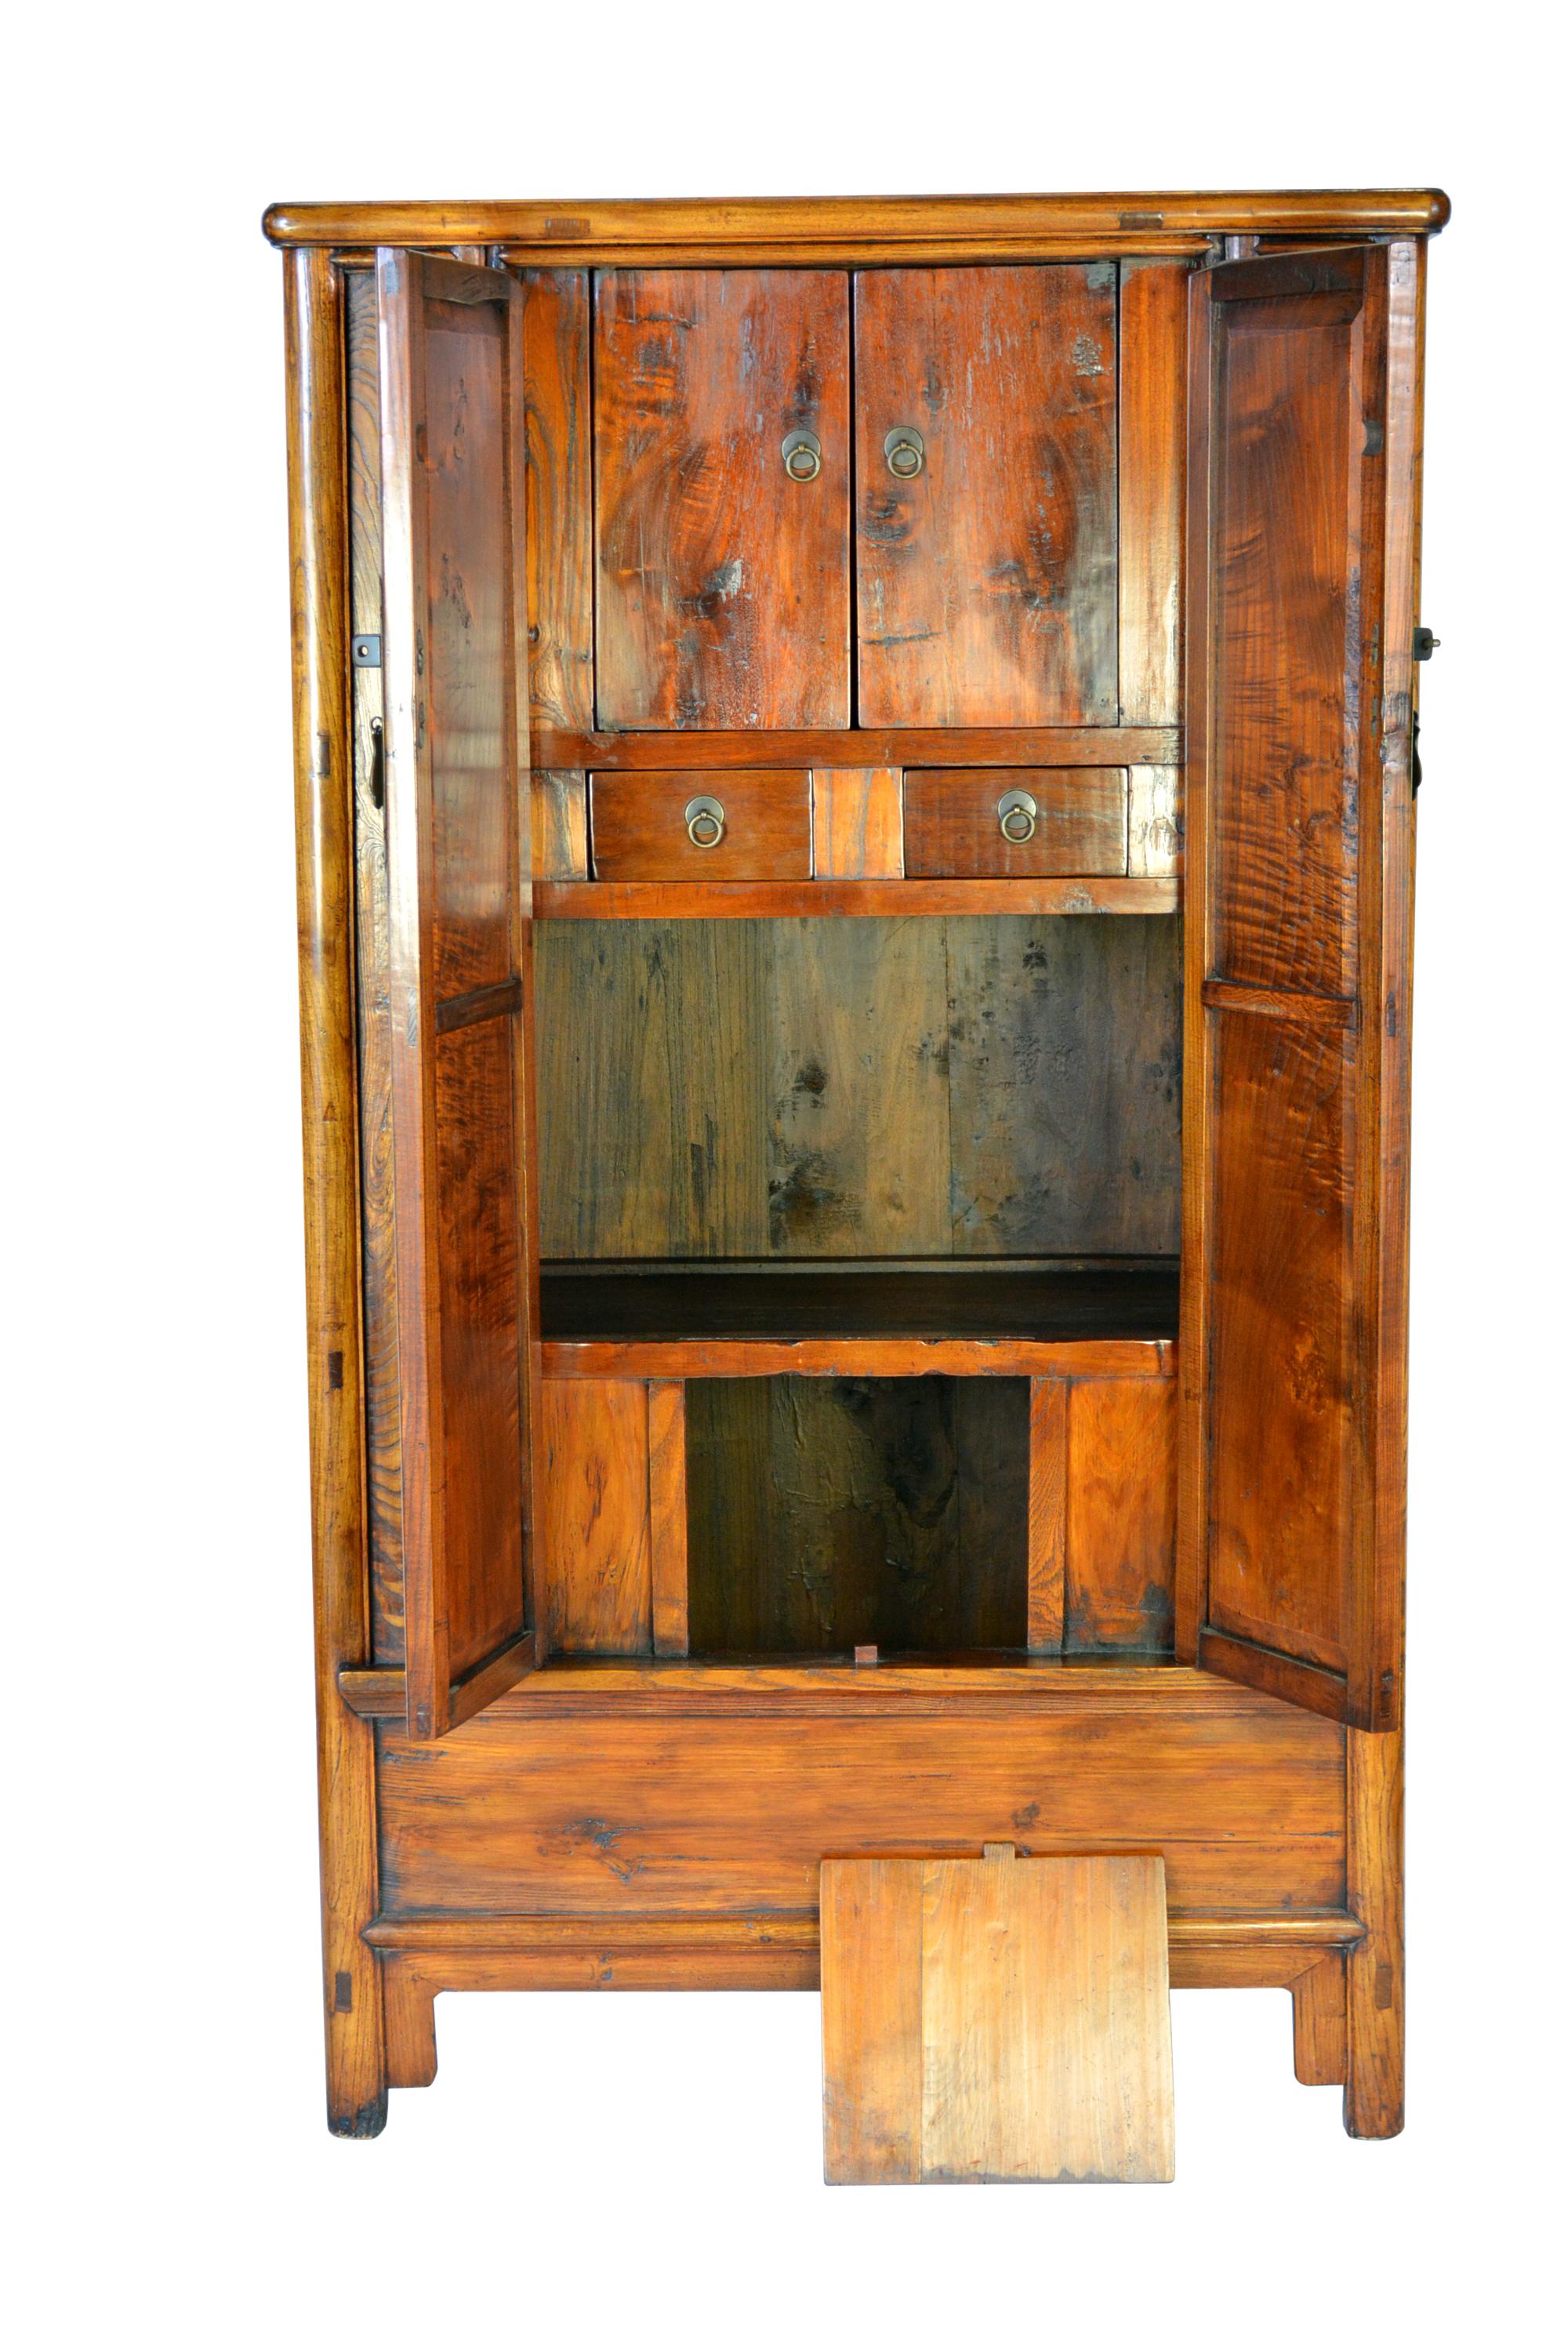 Round cornered cabinet 66.75H x 39W x 21.5D
Round cornered wood hinged cabinet with removable center stile, two interior drawers and two compartments with a protruding stretcher and panel below the door. There is a simple tongue and grooved apron